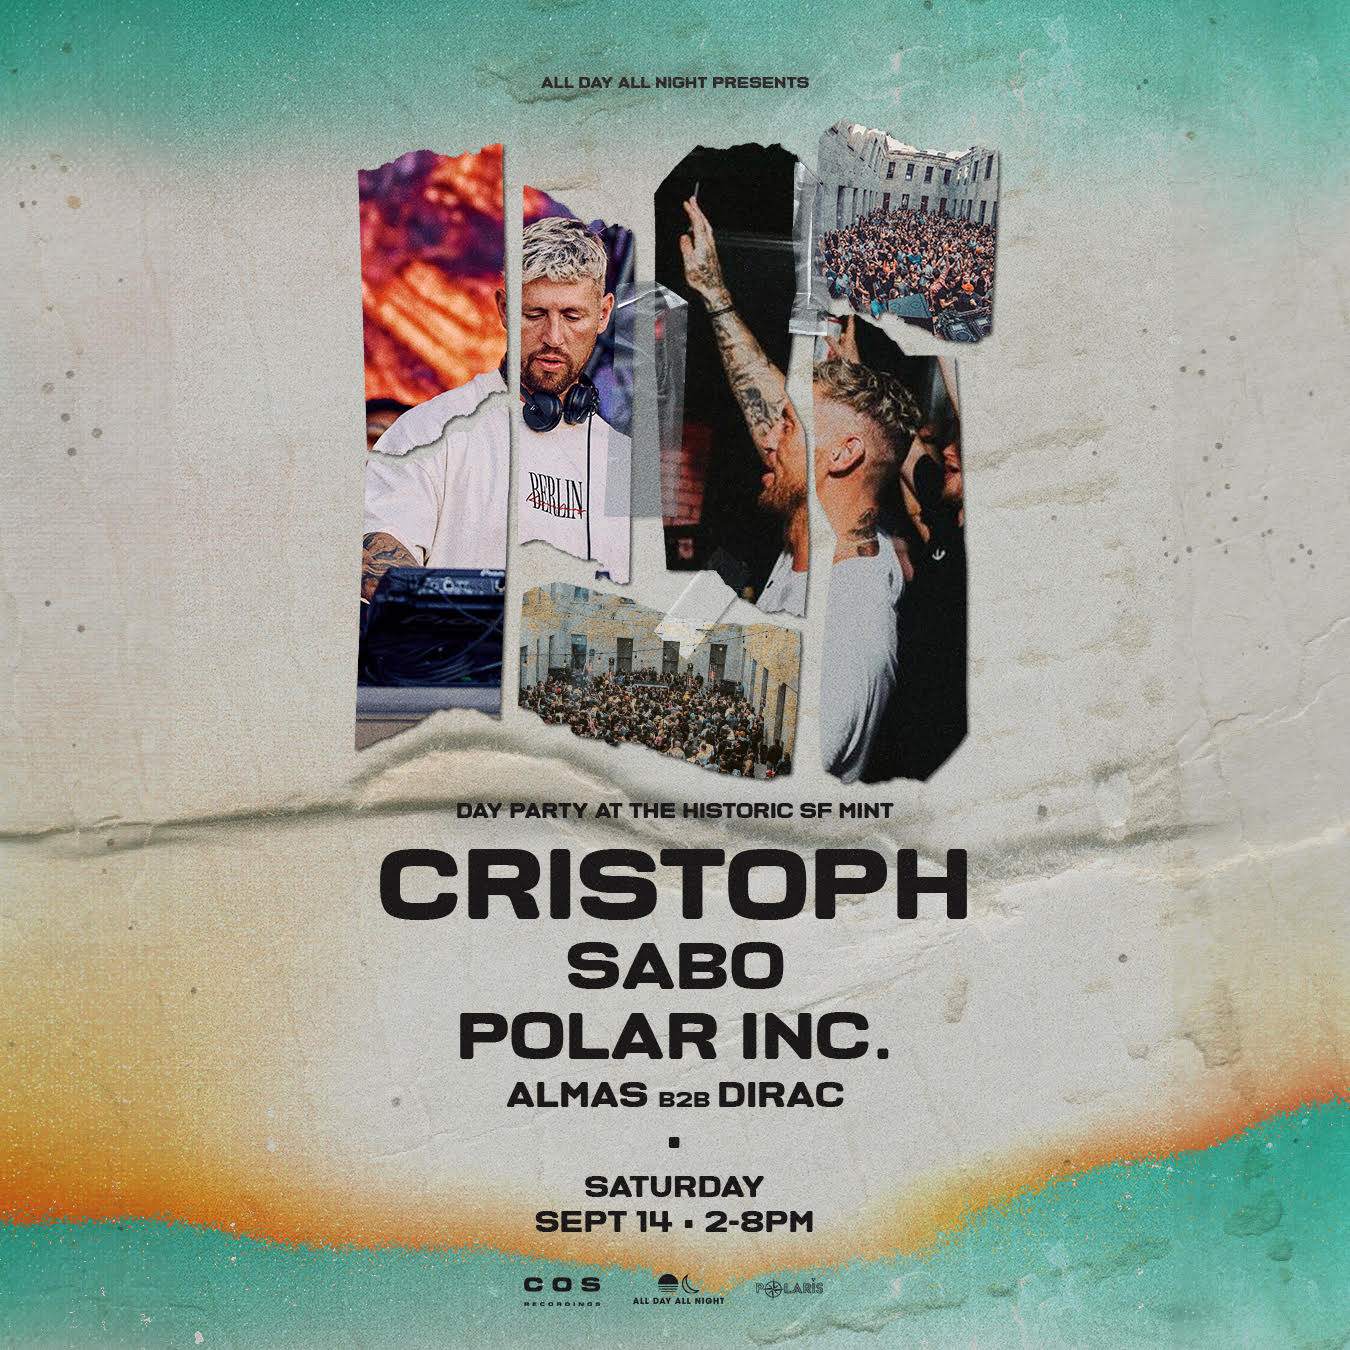 Day Party with Cristoph + Sabo + Polar Inc. at SF Mint - Página frontal